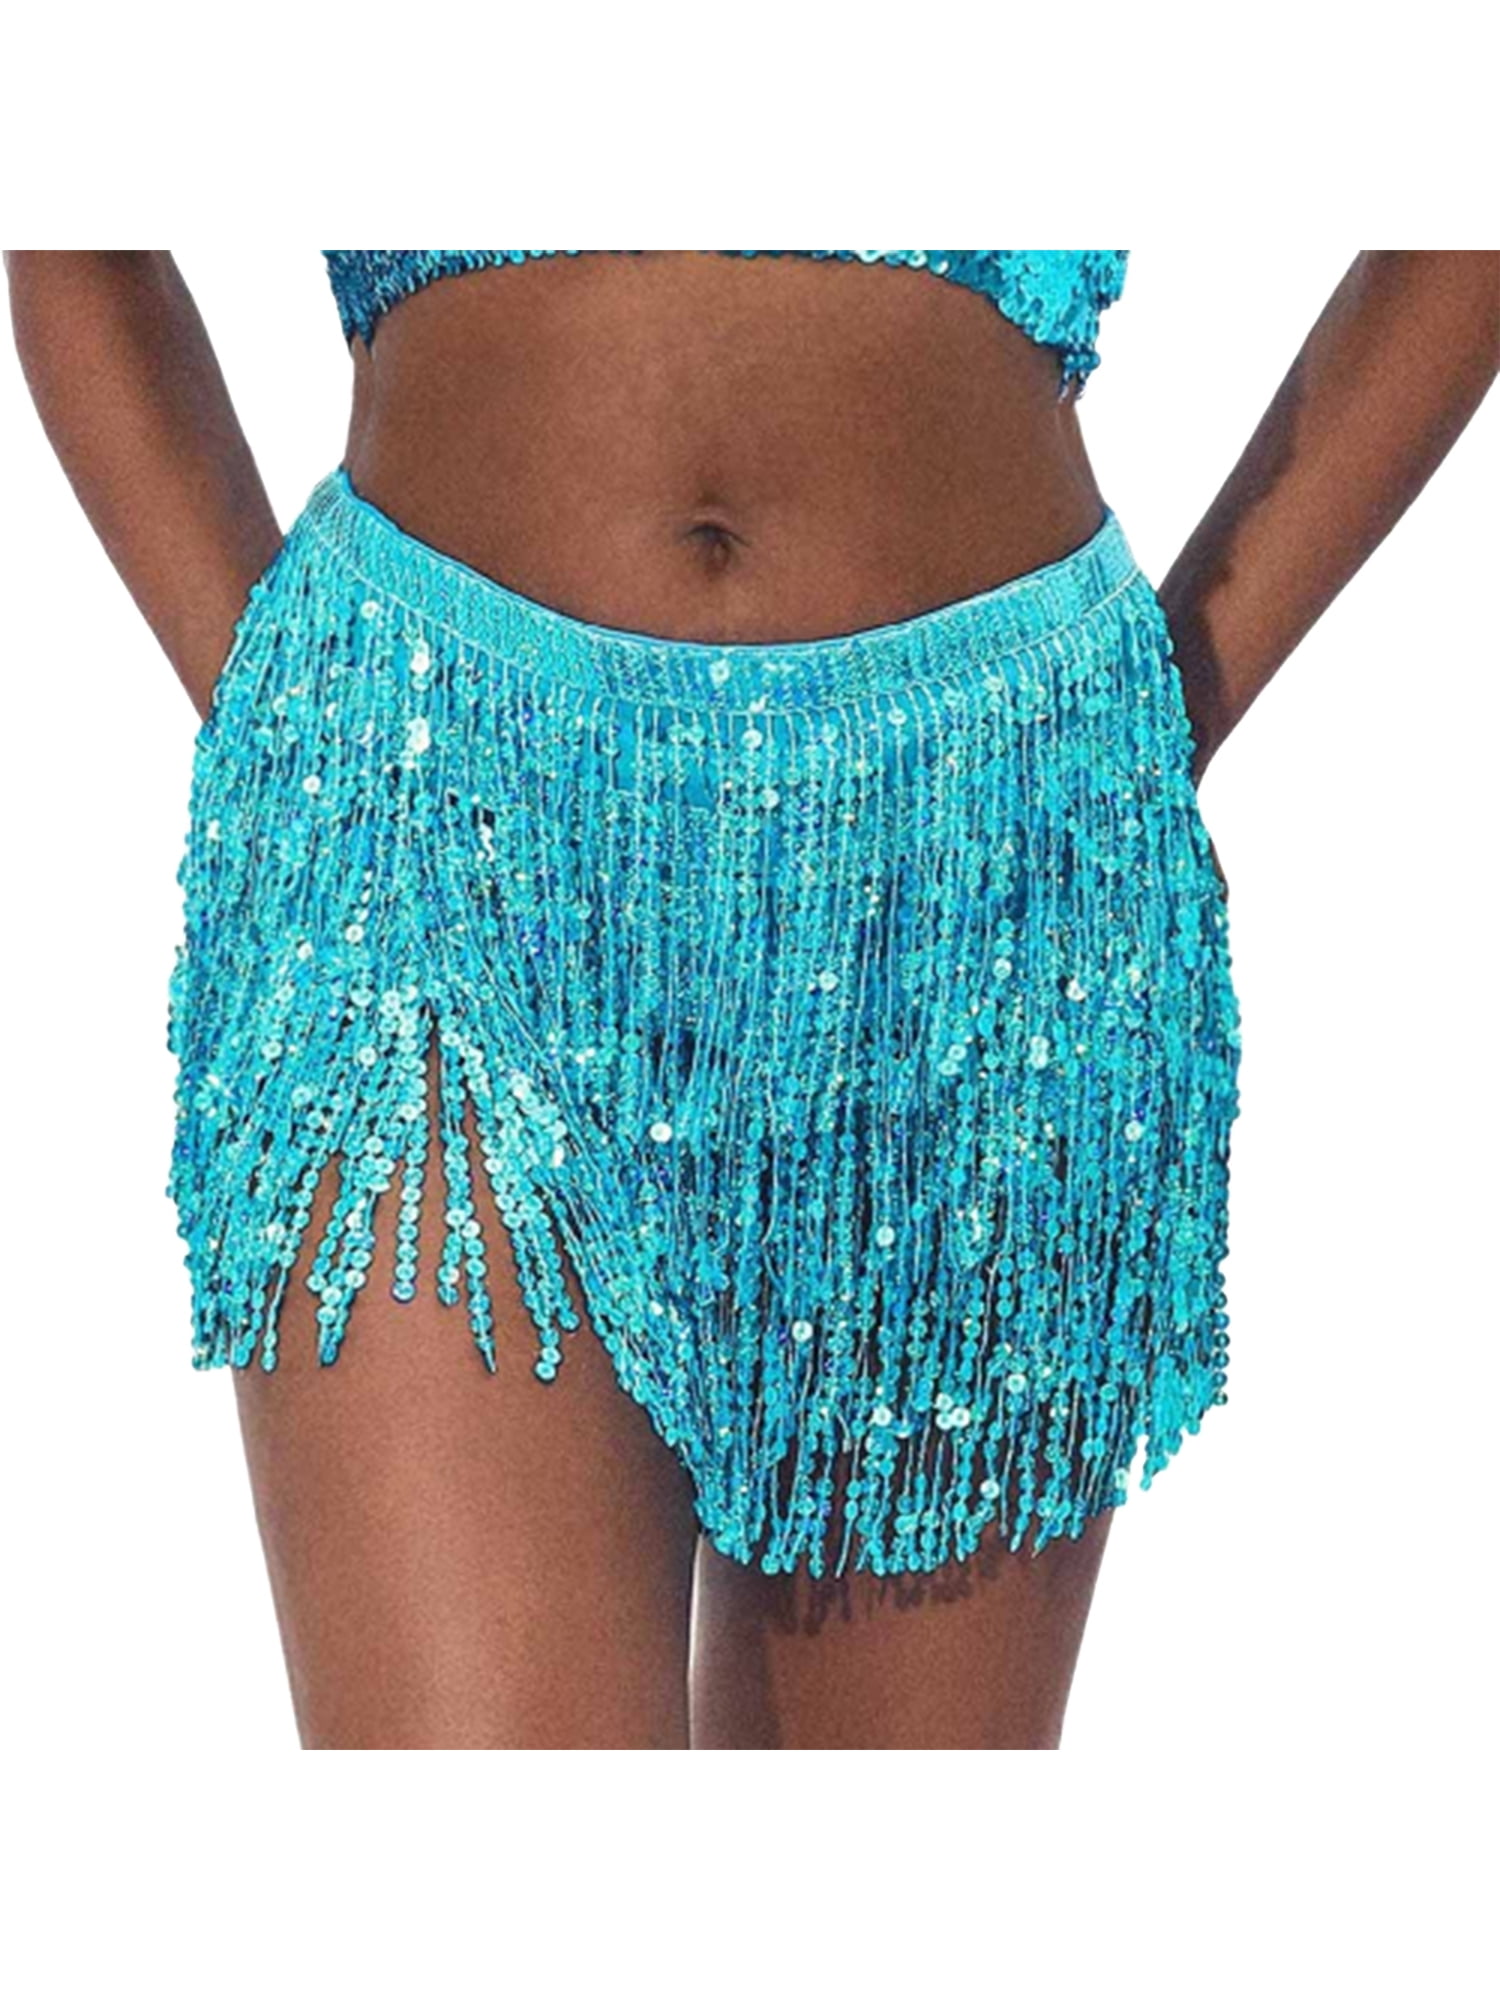 Women's Belly Dance Hip Skirt Tassel Sequins Hip Scarf Strappy Wrap Rave Skirts Party Clubwear 